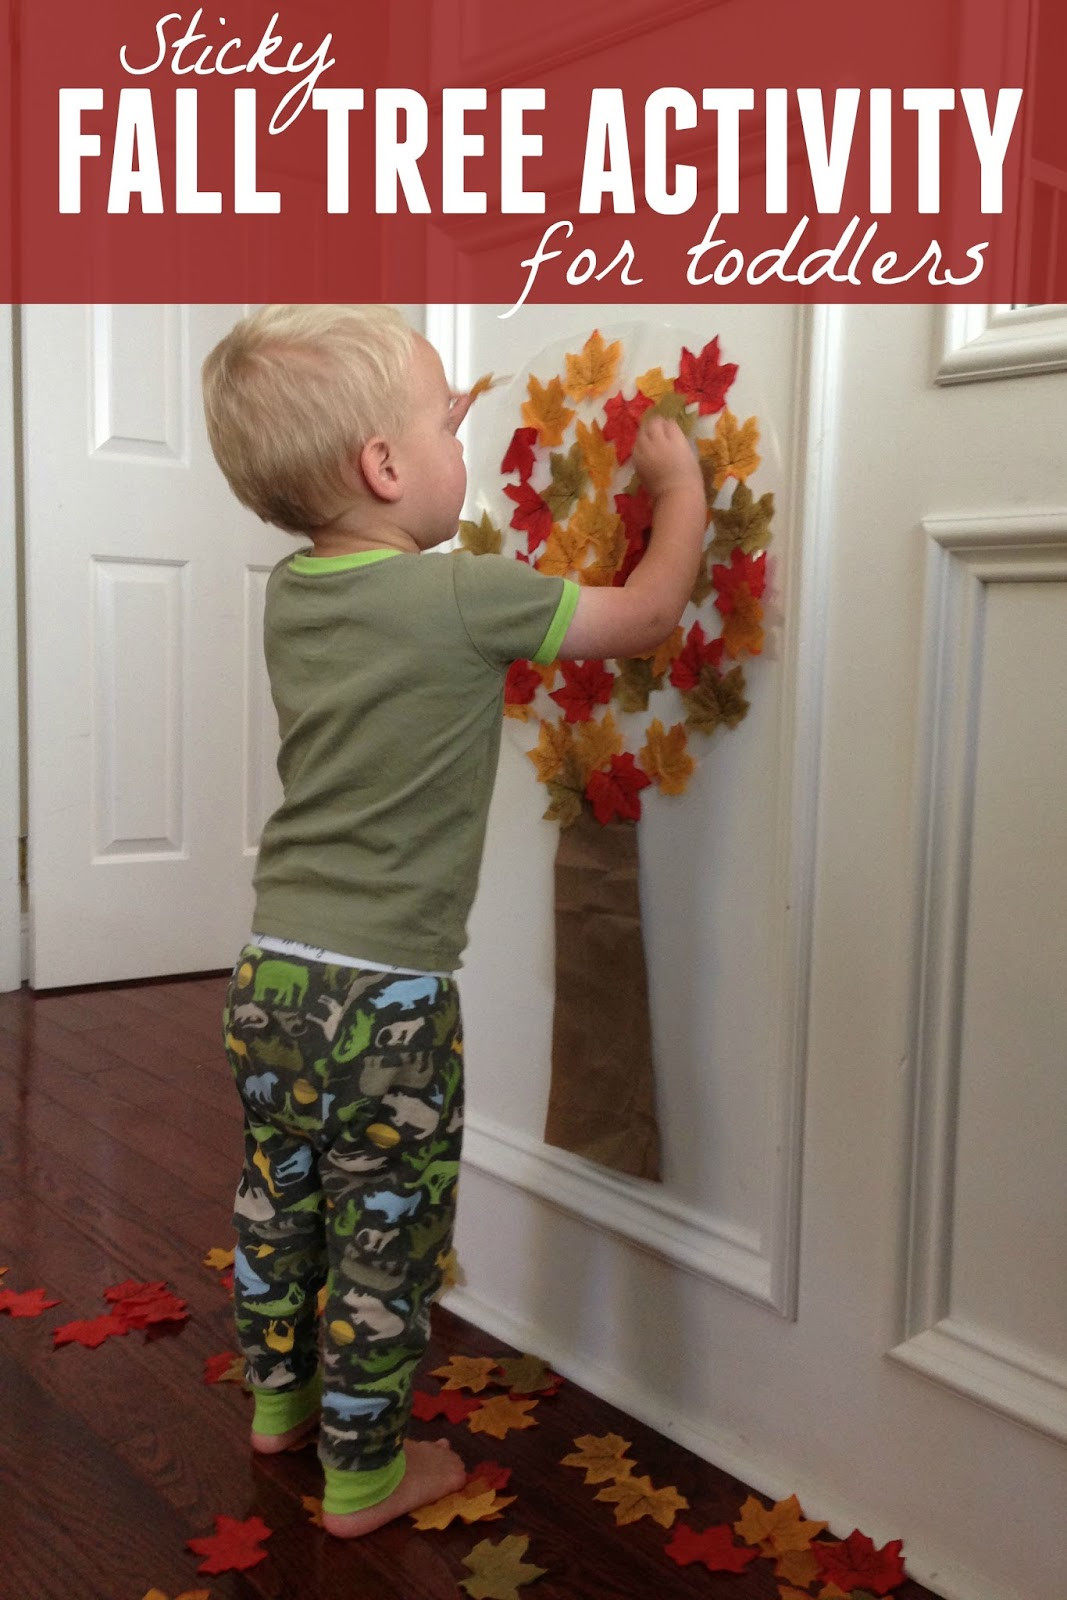 Crafts And Activities For Toddlers
 Toddler Approved Easy Fall Tree Activity for Toddlers